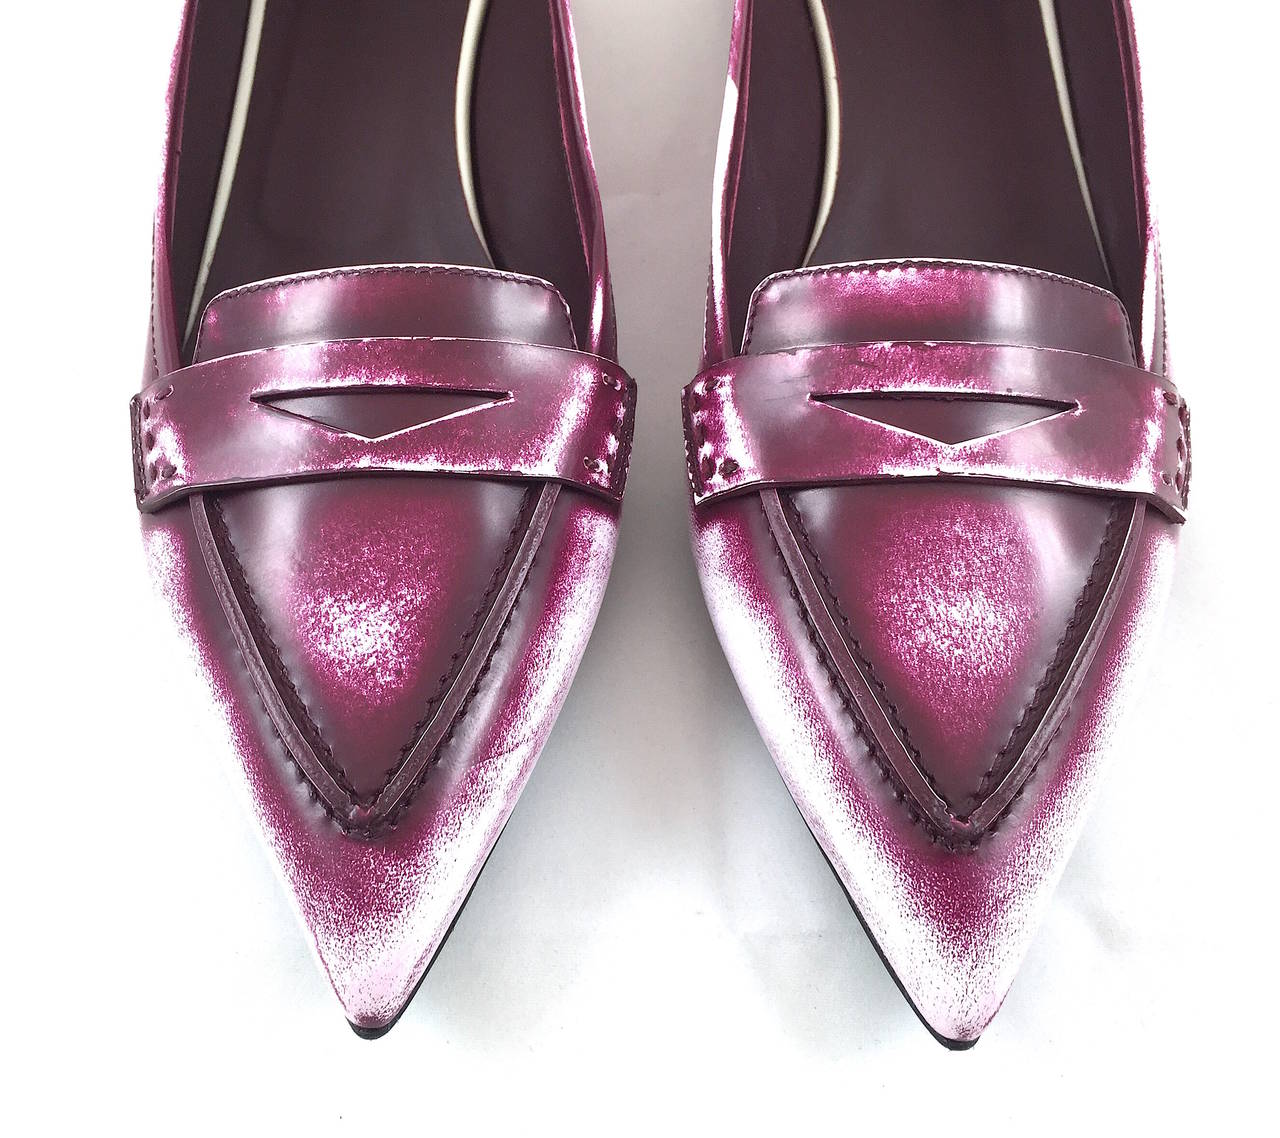 Fendi loafers featuring burgundy and white leather with a faded effect and glossy finish. They have 1